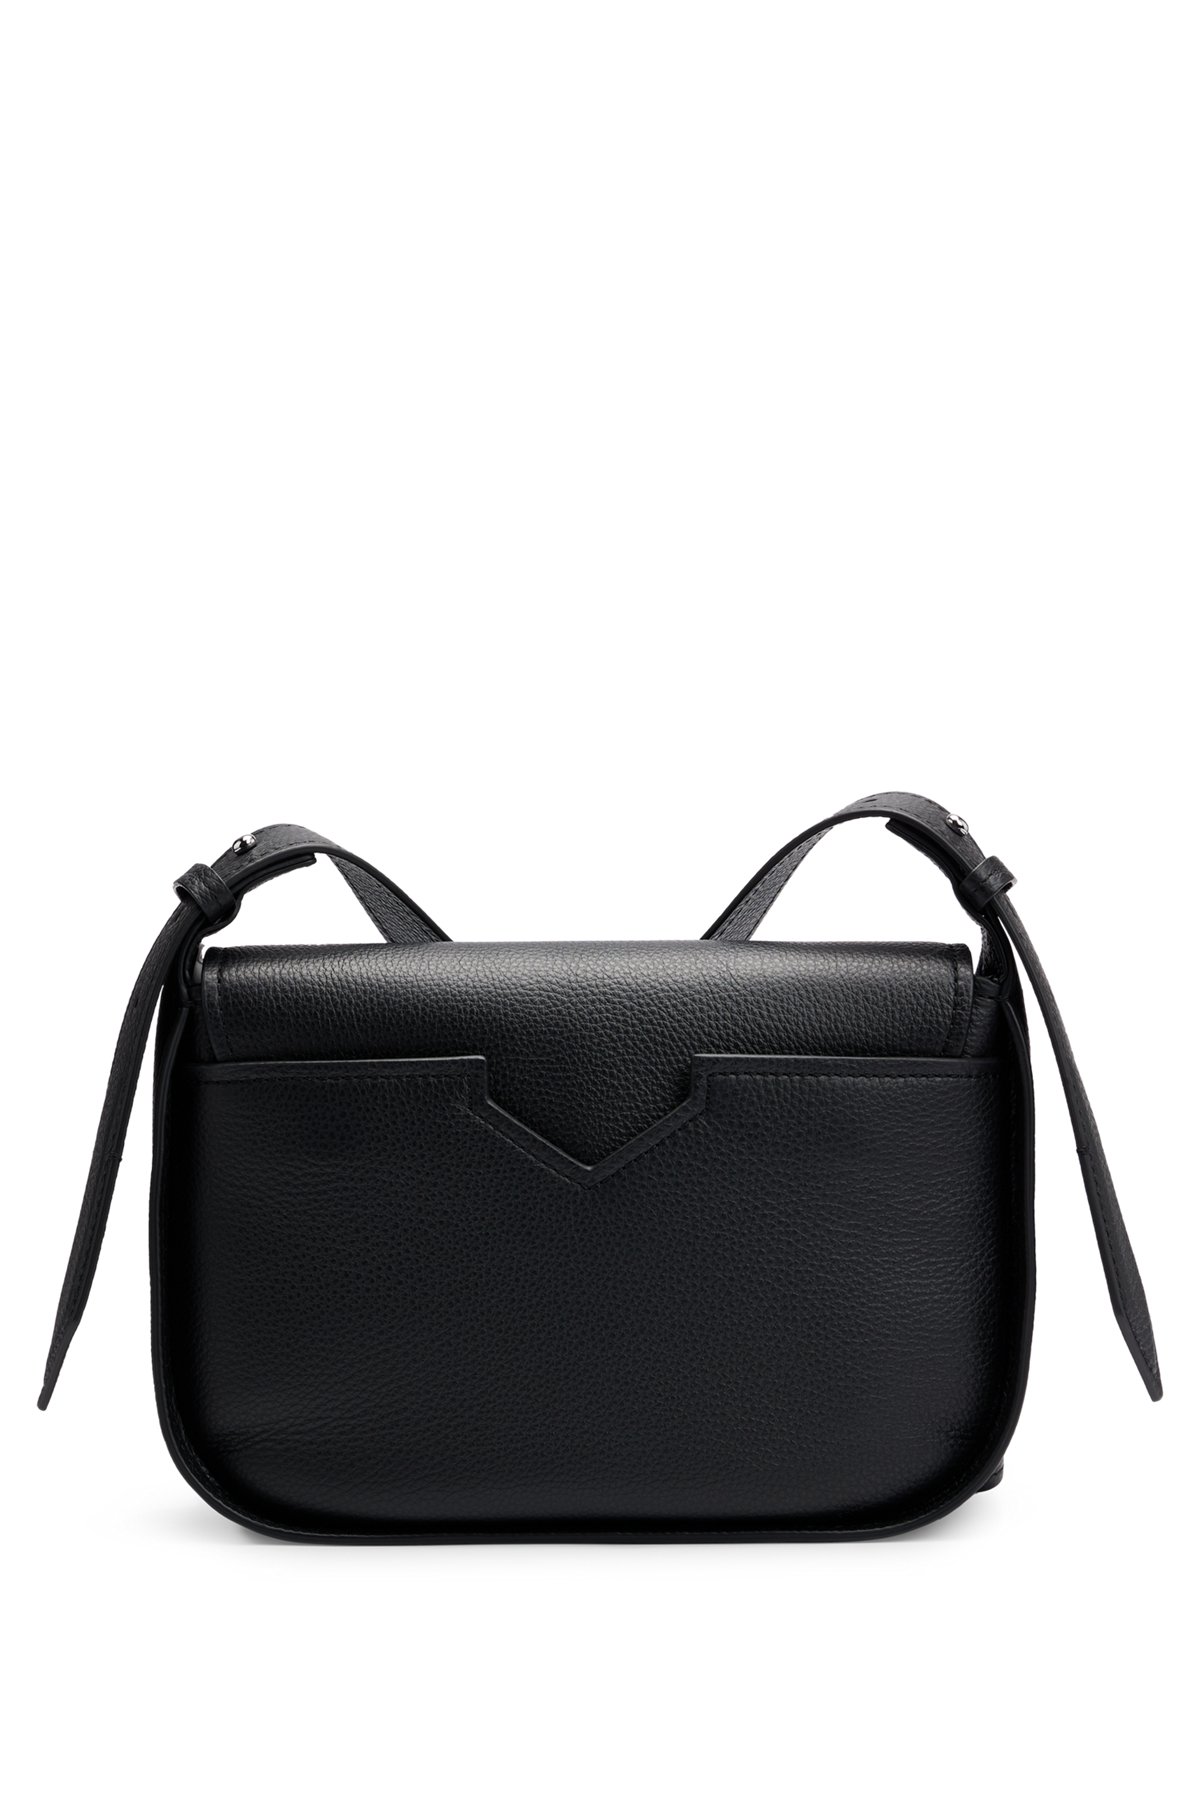 Grained-leather saddle bag with embossed logo, Black